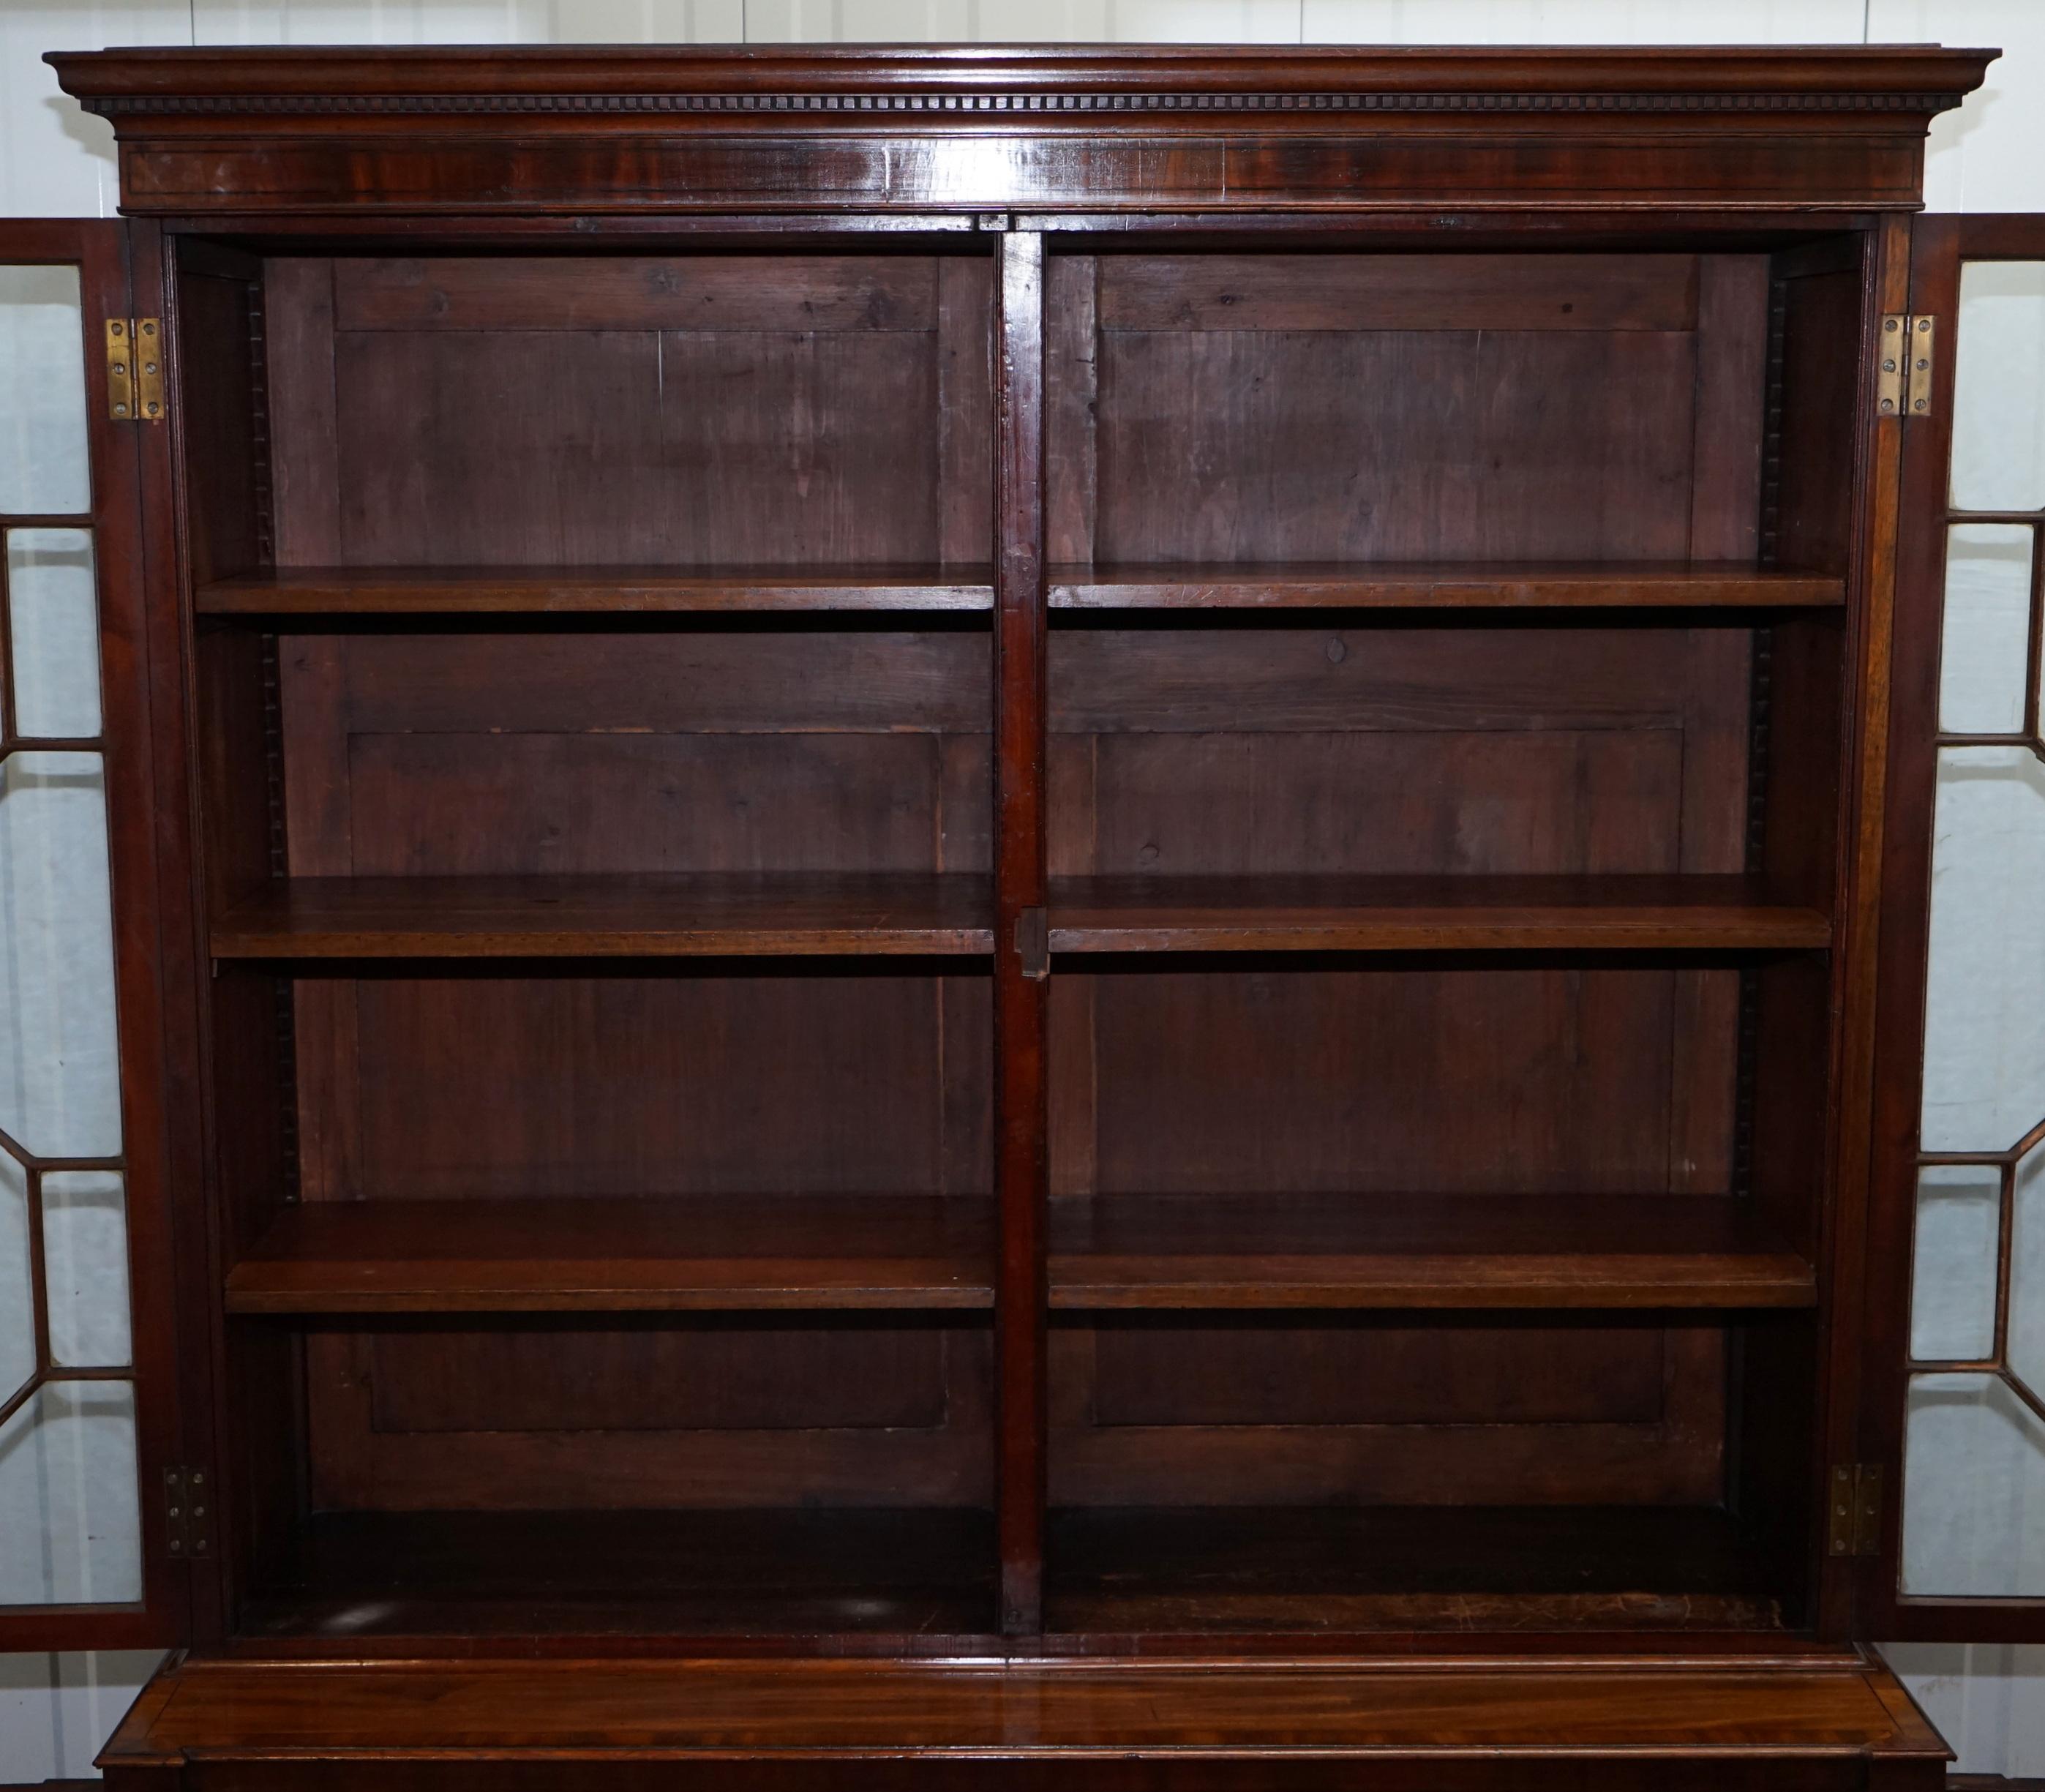 Very Rare Gillows Astral Glazed Mahogany Bookcase Cabinet Original Paper Labels 9